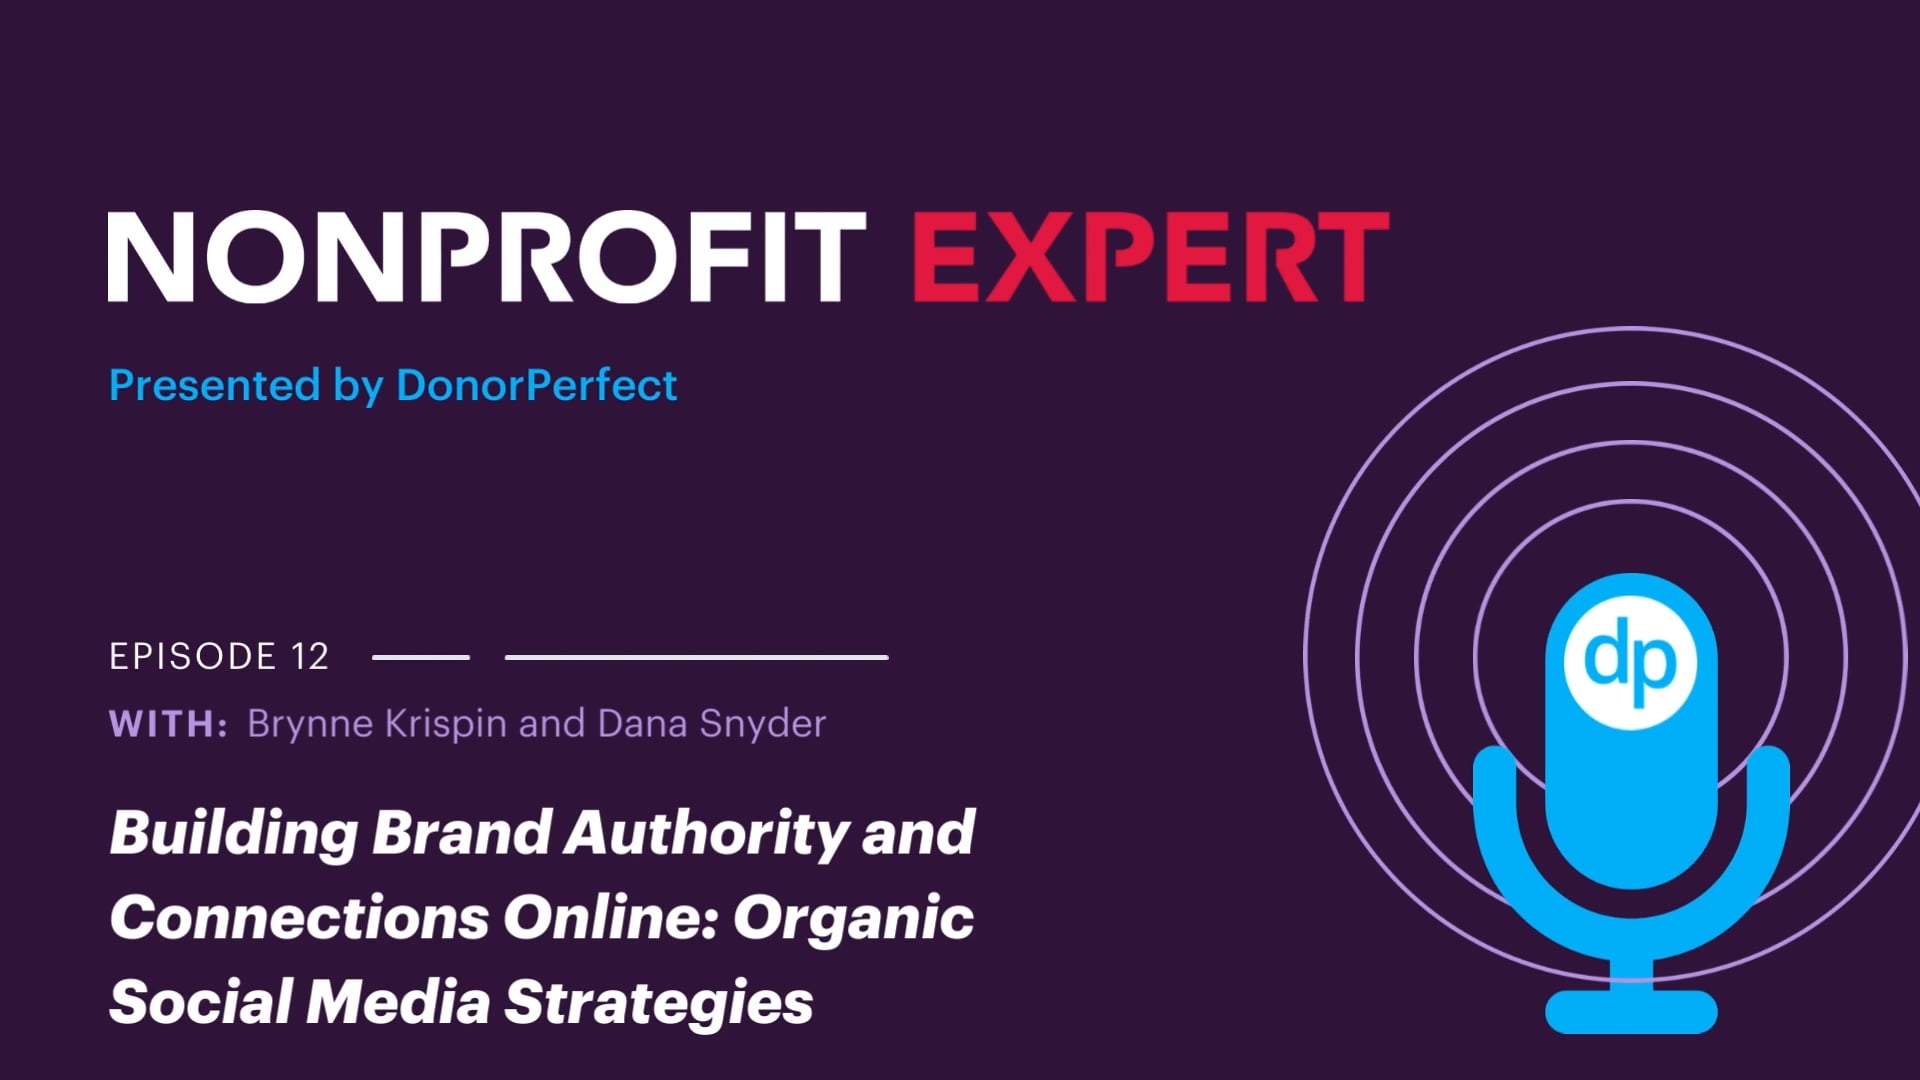 Nonprofit Expert Episode 12 - Building Brand Authority and Connections Online